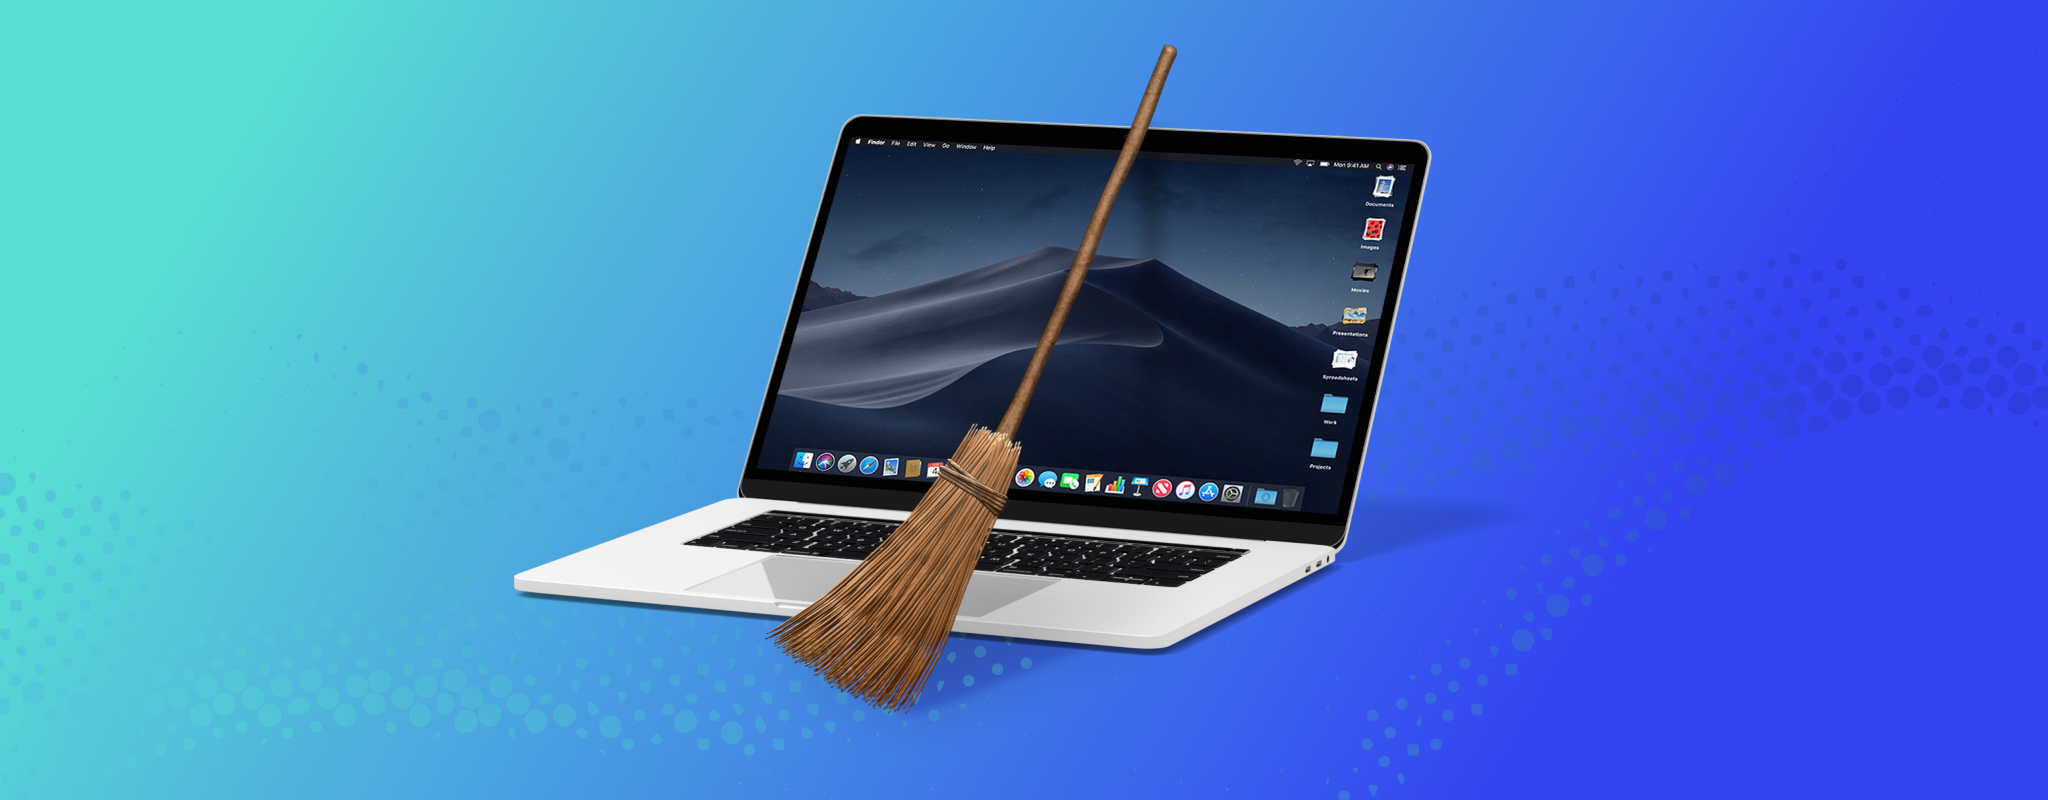 mac cleaner for 10.9